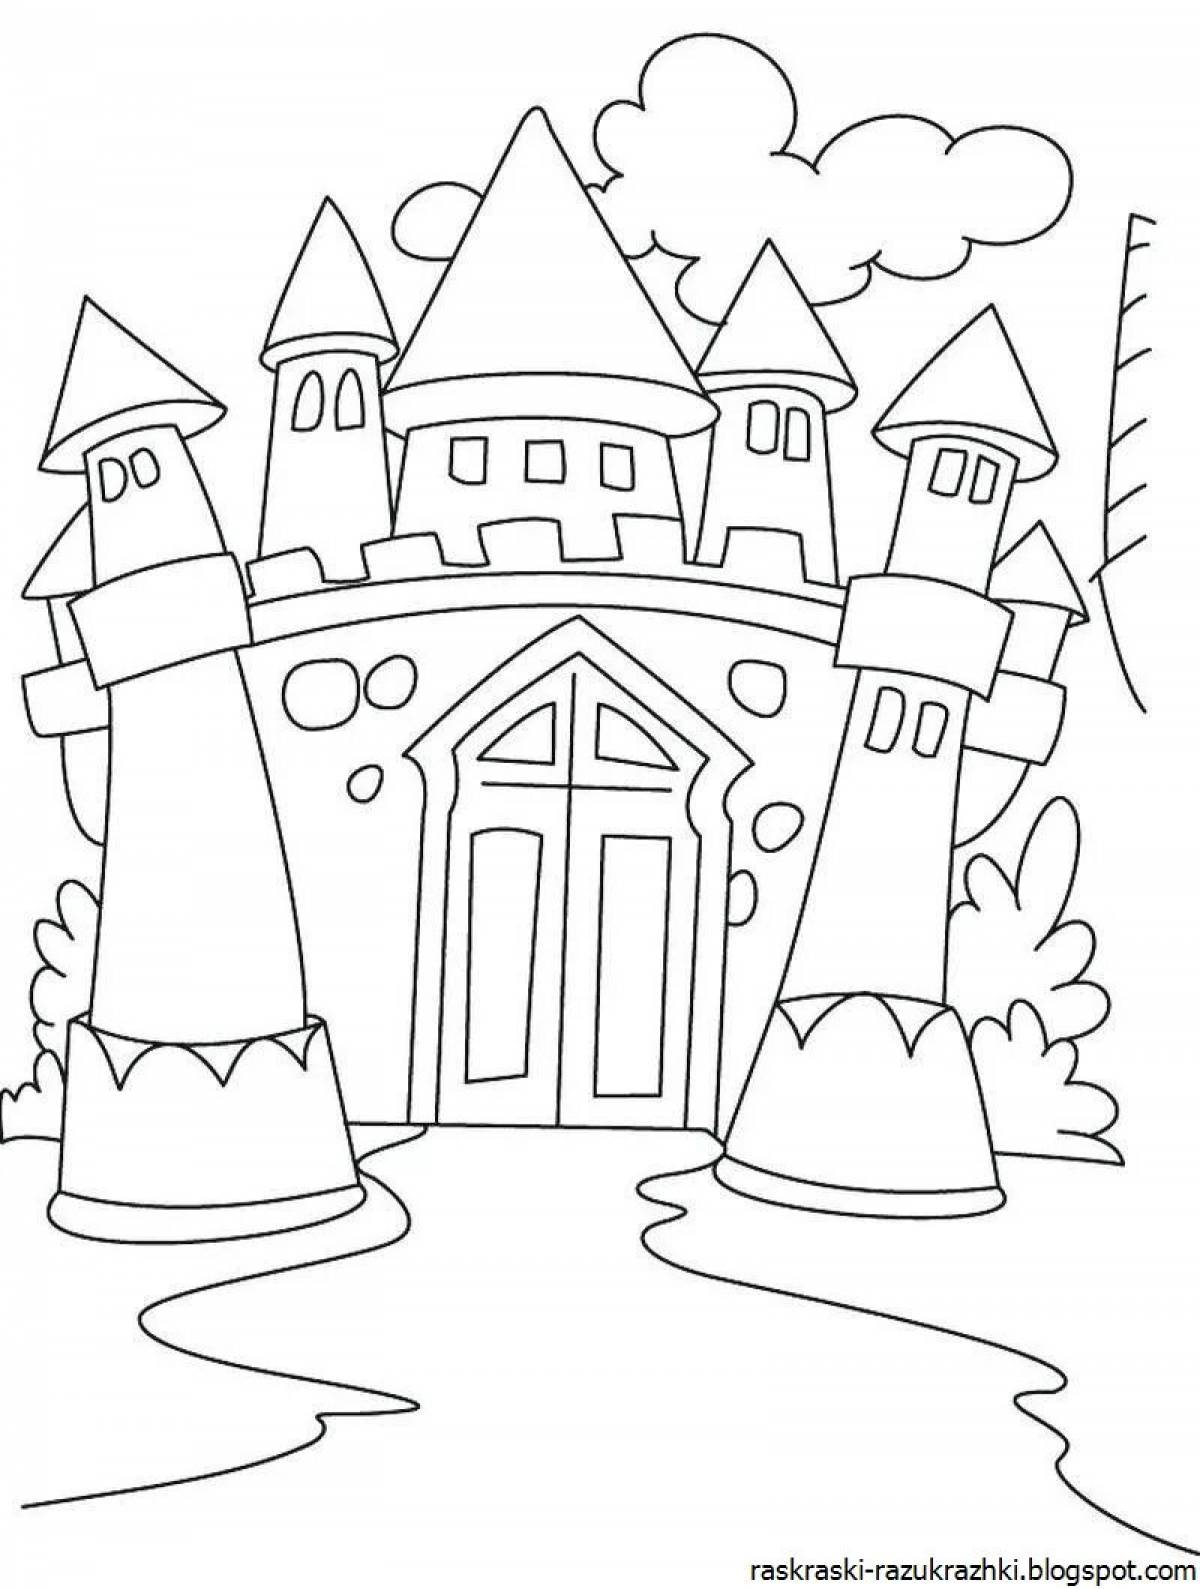 Coloring book funny fairytale castle